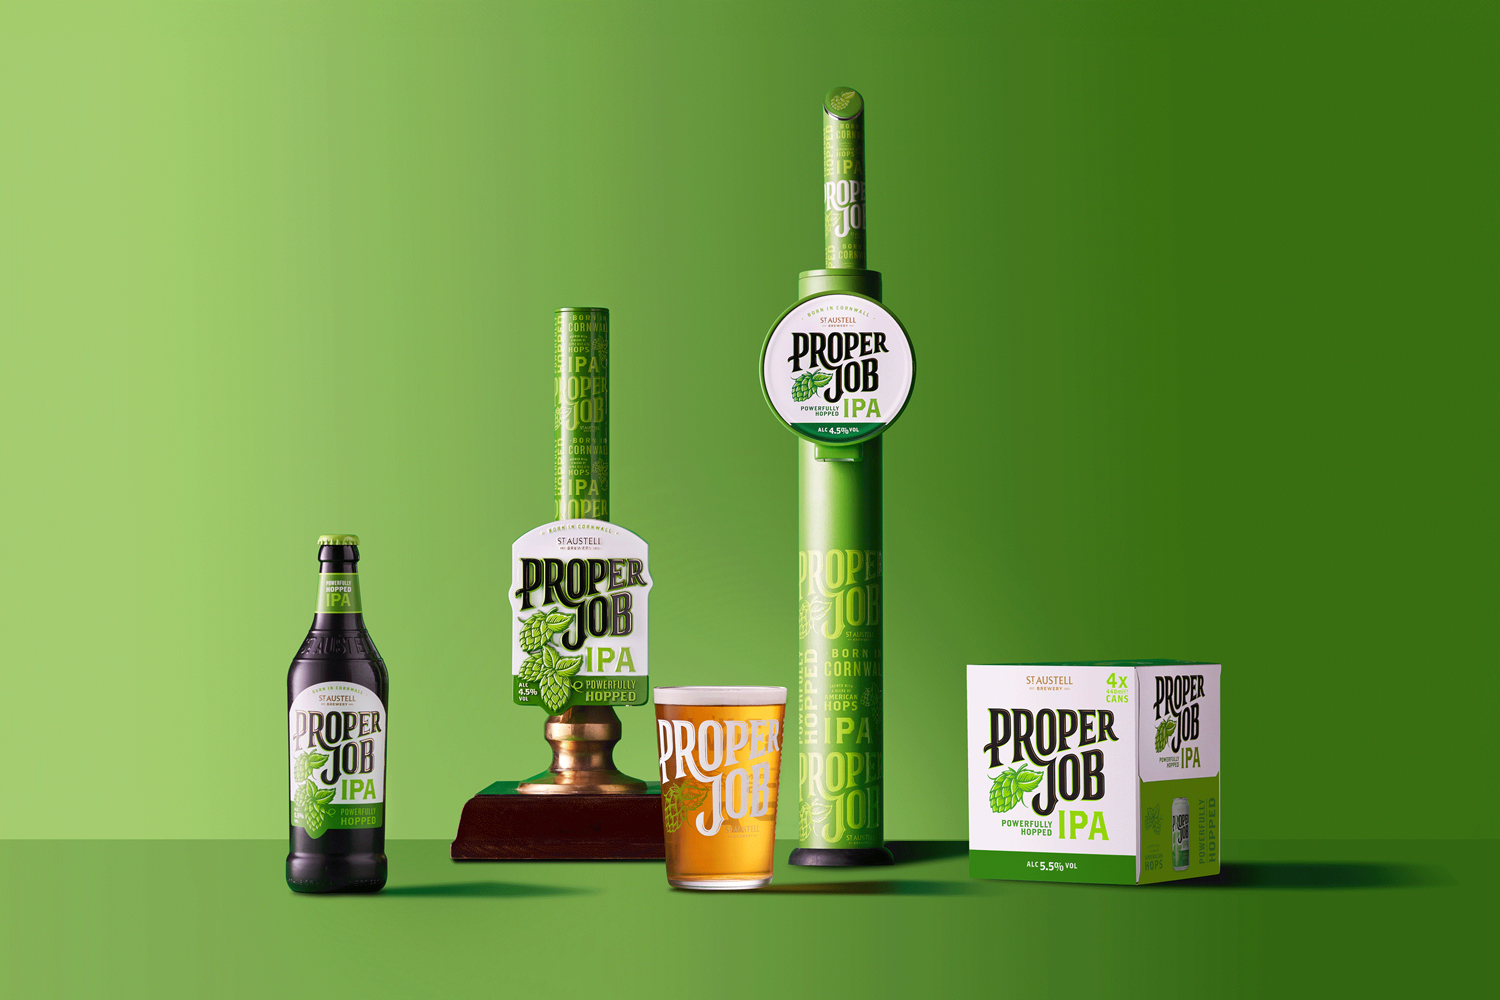 Revamping the Packaging Design of St Austell Brewery's IPA, Proper Job: A Collaboration between Thirst and Tobias Hall